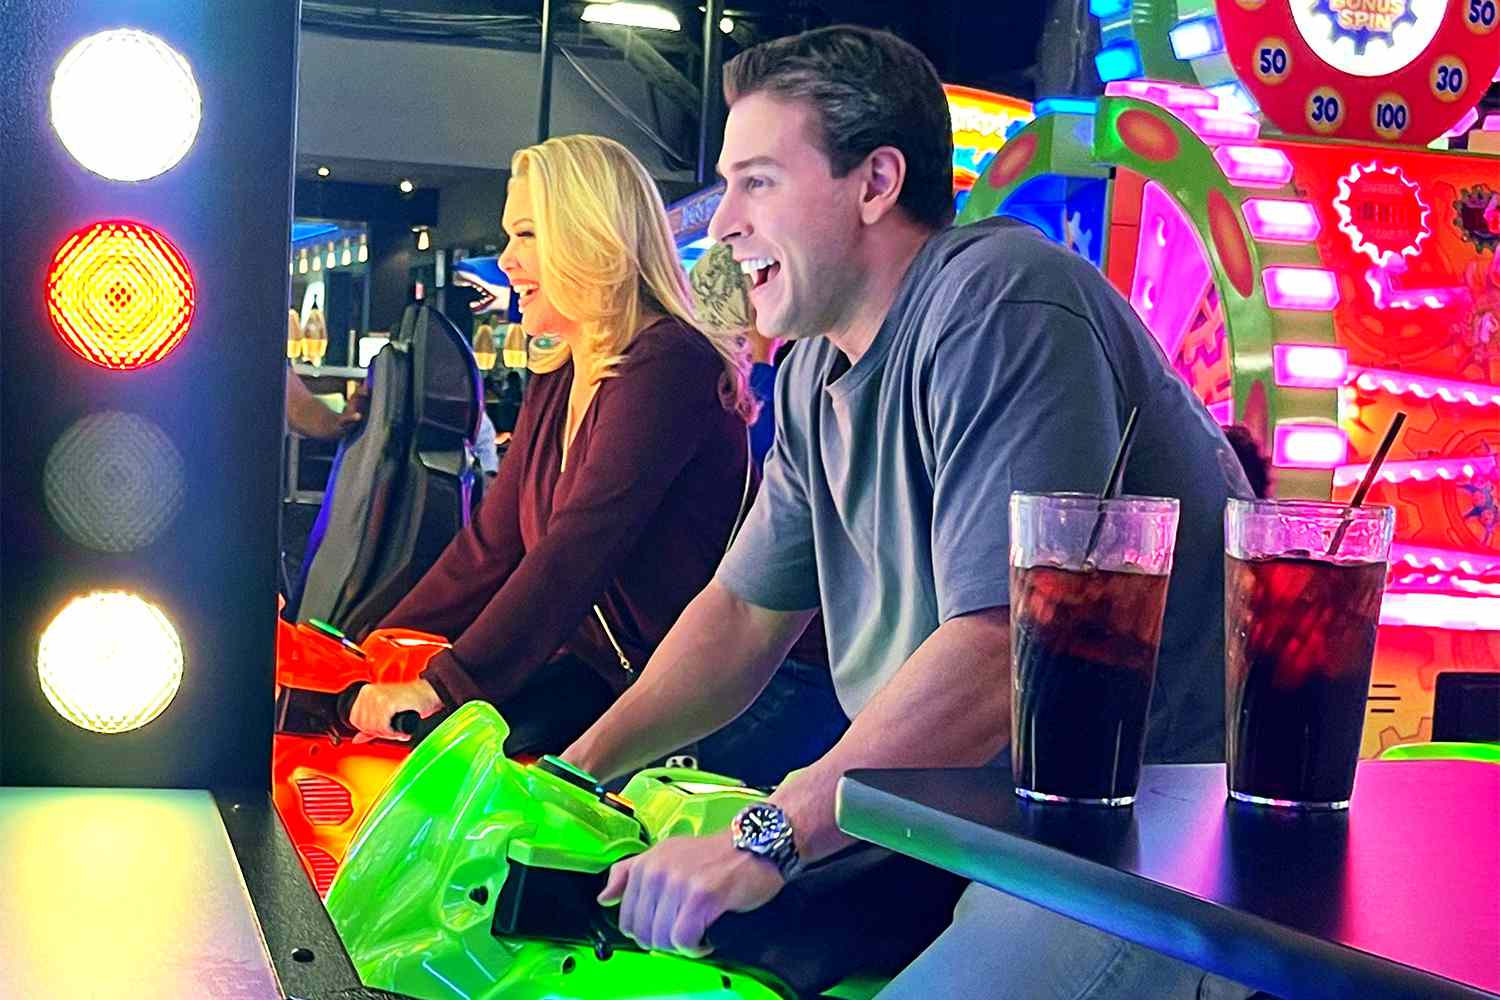 Los Angeles, CA - *EXCLUSIVE* - Shanna Moakler and her boyfriend, Matthew Rondeau are seen enjoying themselves at Dave and Busters only hours after police responded to a "Domestic Disturbance" call at Moakler's SFV home. Shanna & Matthew were seen shooting basketballs, skee-ball & motorcycles at the Northridge Dave & Busters. Pictured: Shanna Moakler, Matthew Rondeau BACKGRID USA 29 JULY 2022 BYLINE MUST READ: LionsShareNews / BACKGRID USA: +1 310 798 9111 / usasales@backgrid.com UK: +44 208 344 2007 / uksales@backgrid.com *UK Clients - Pictures Containing Children Please Pixelate Face Prior To Publication*